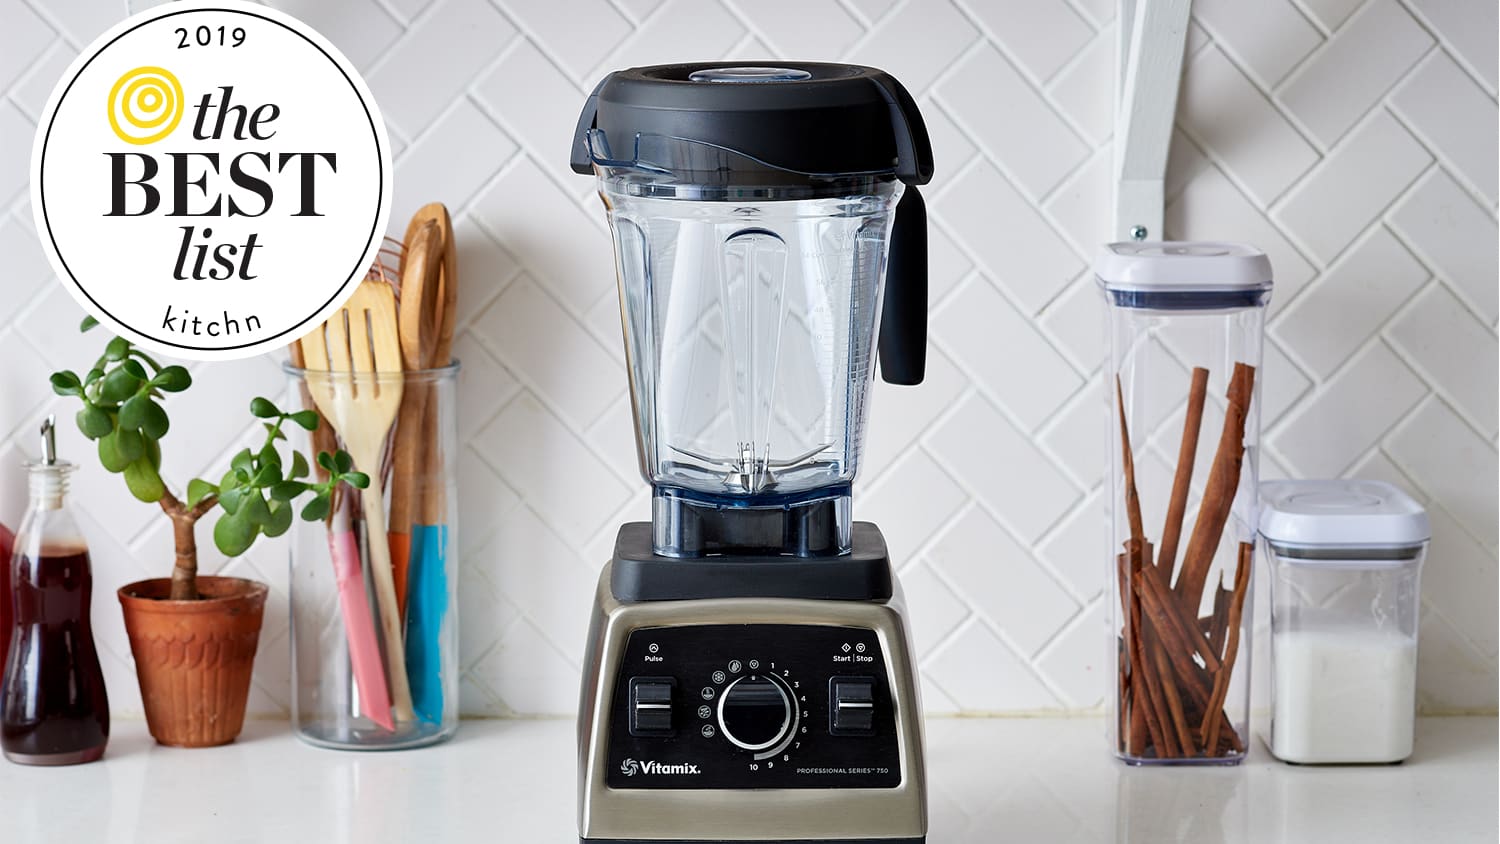 Best Blenders To Buy In 2019 On Budget | Kitchn